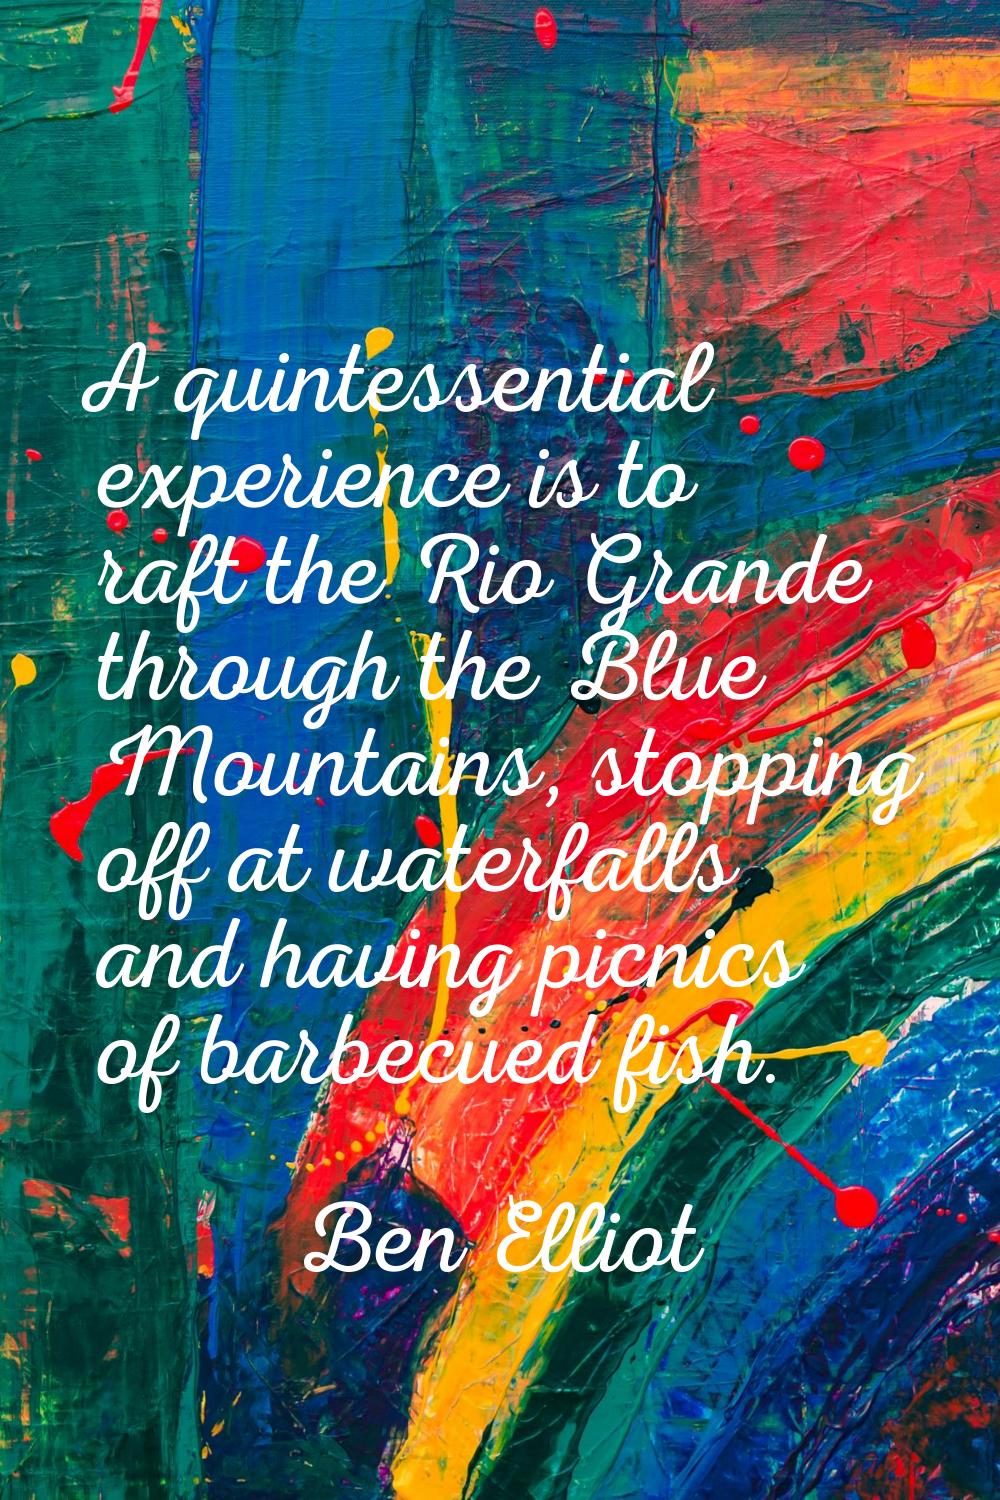 A quintessential experience is to raft the Rio Grande through the Blue Mountains, stopping off at w